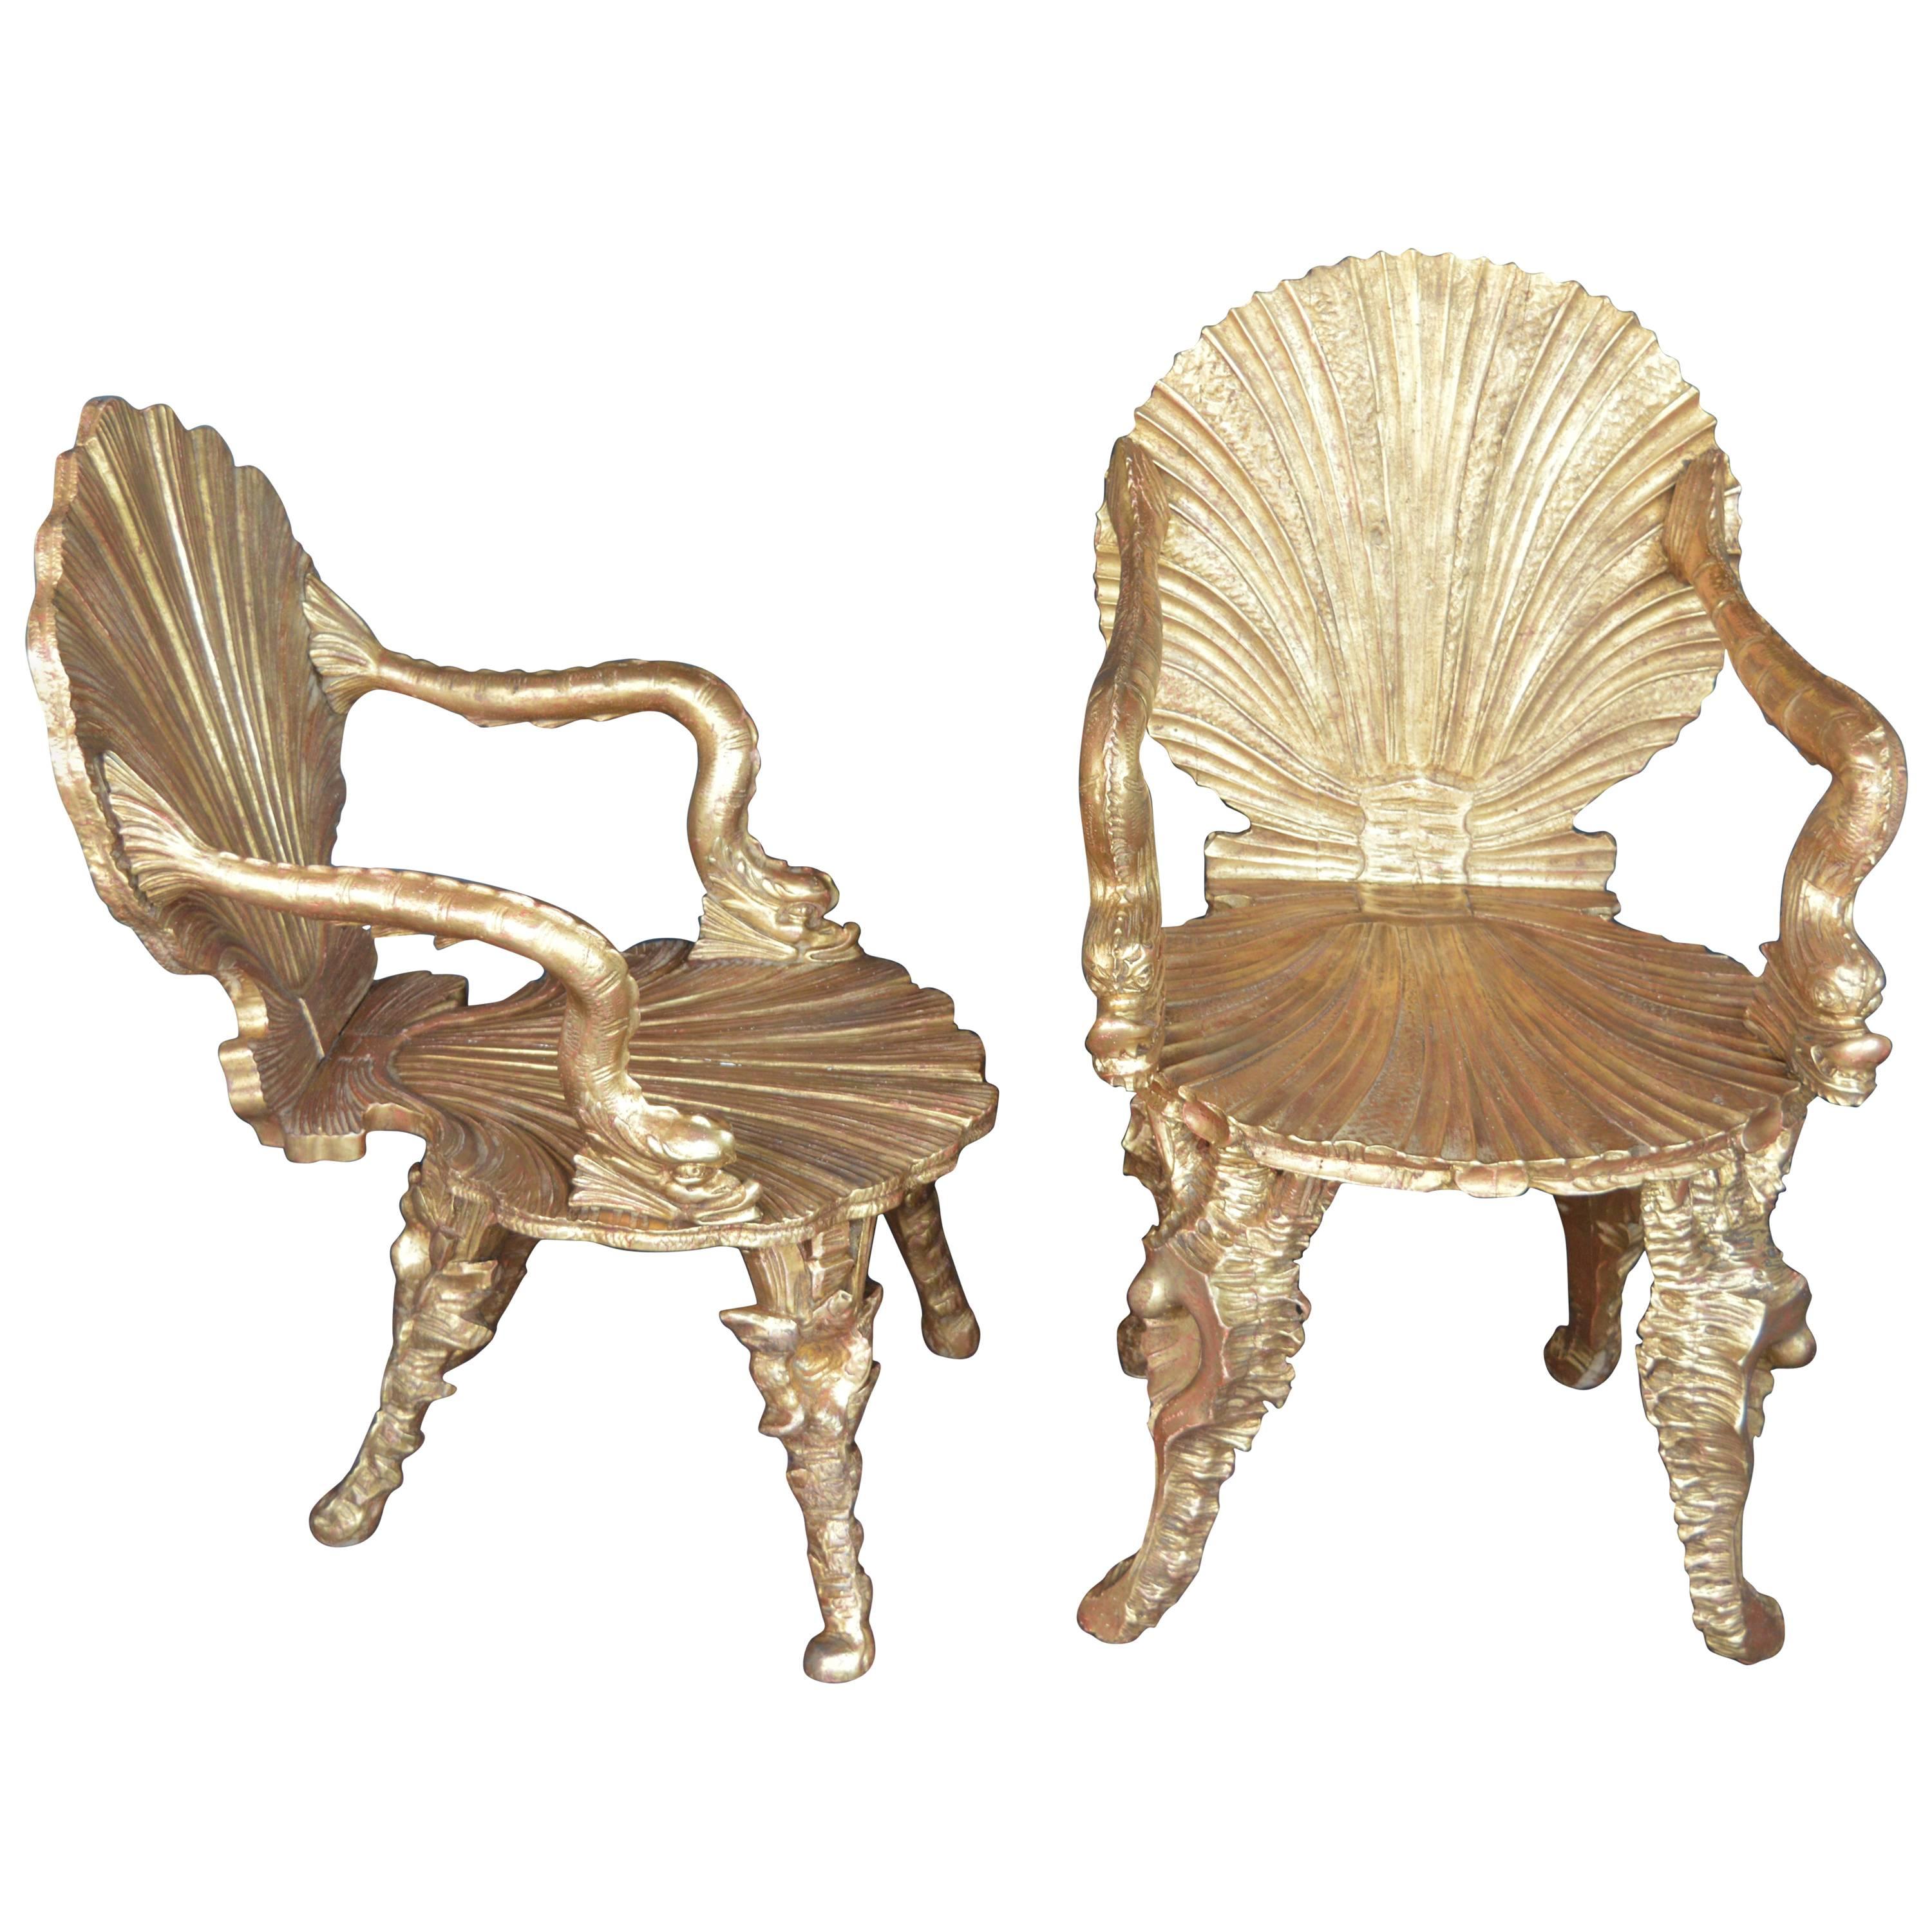 Two Giltwood Grotto Chairs